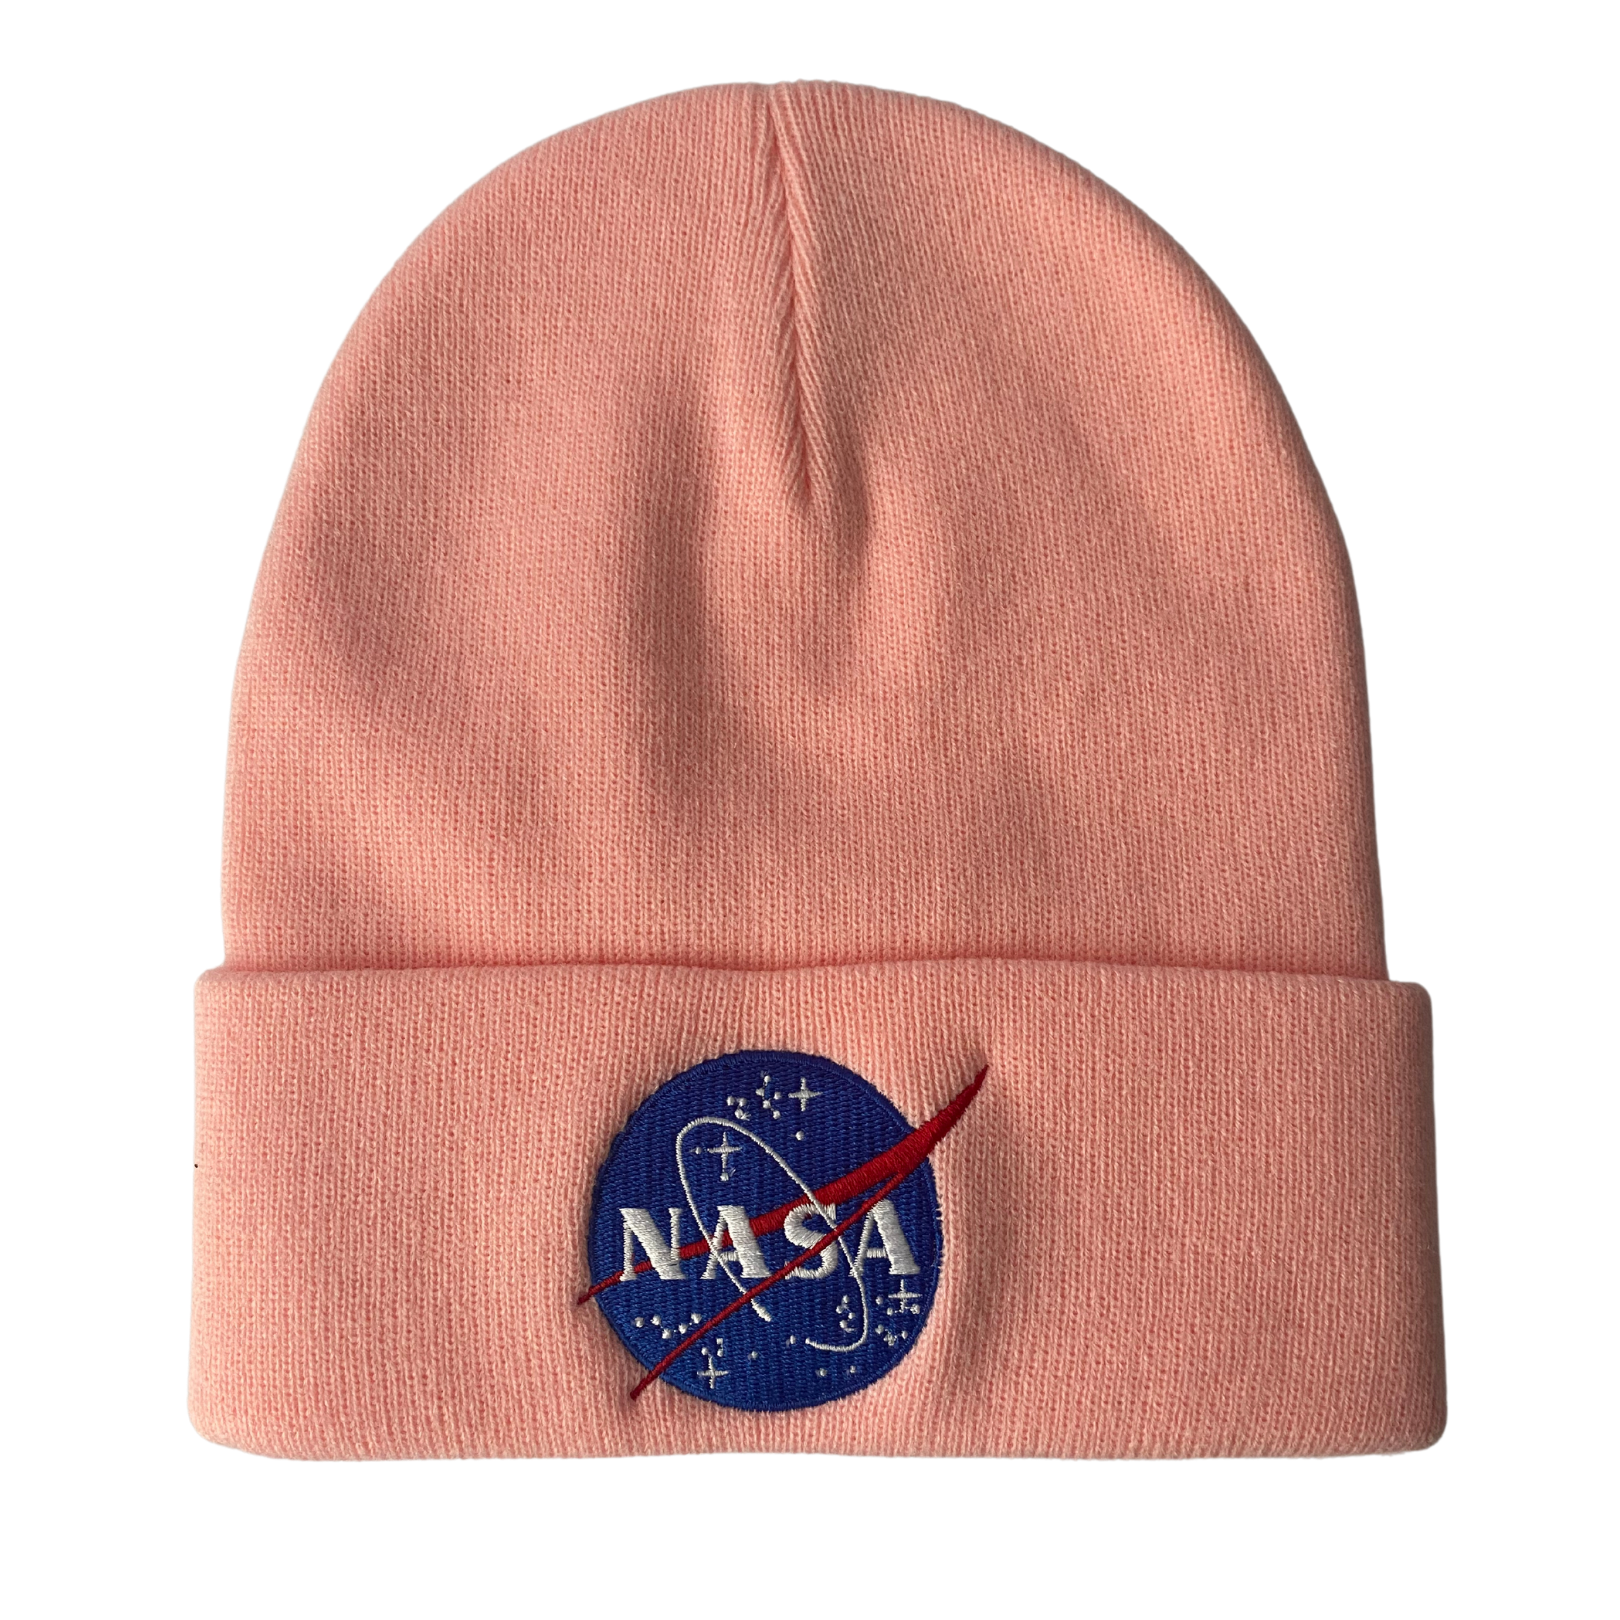 NASA Logo Embroidered Beanie with – Colors Assorted Cuff - myNASAstore